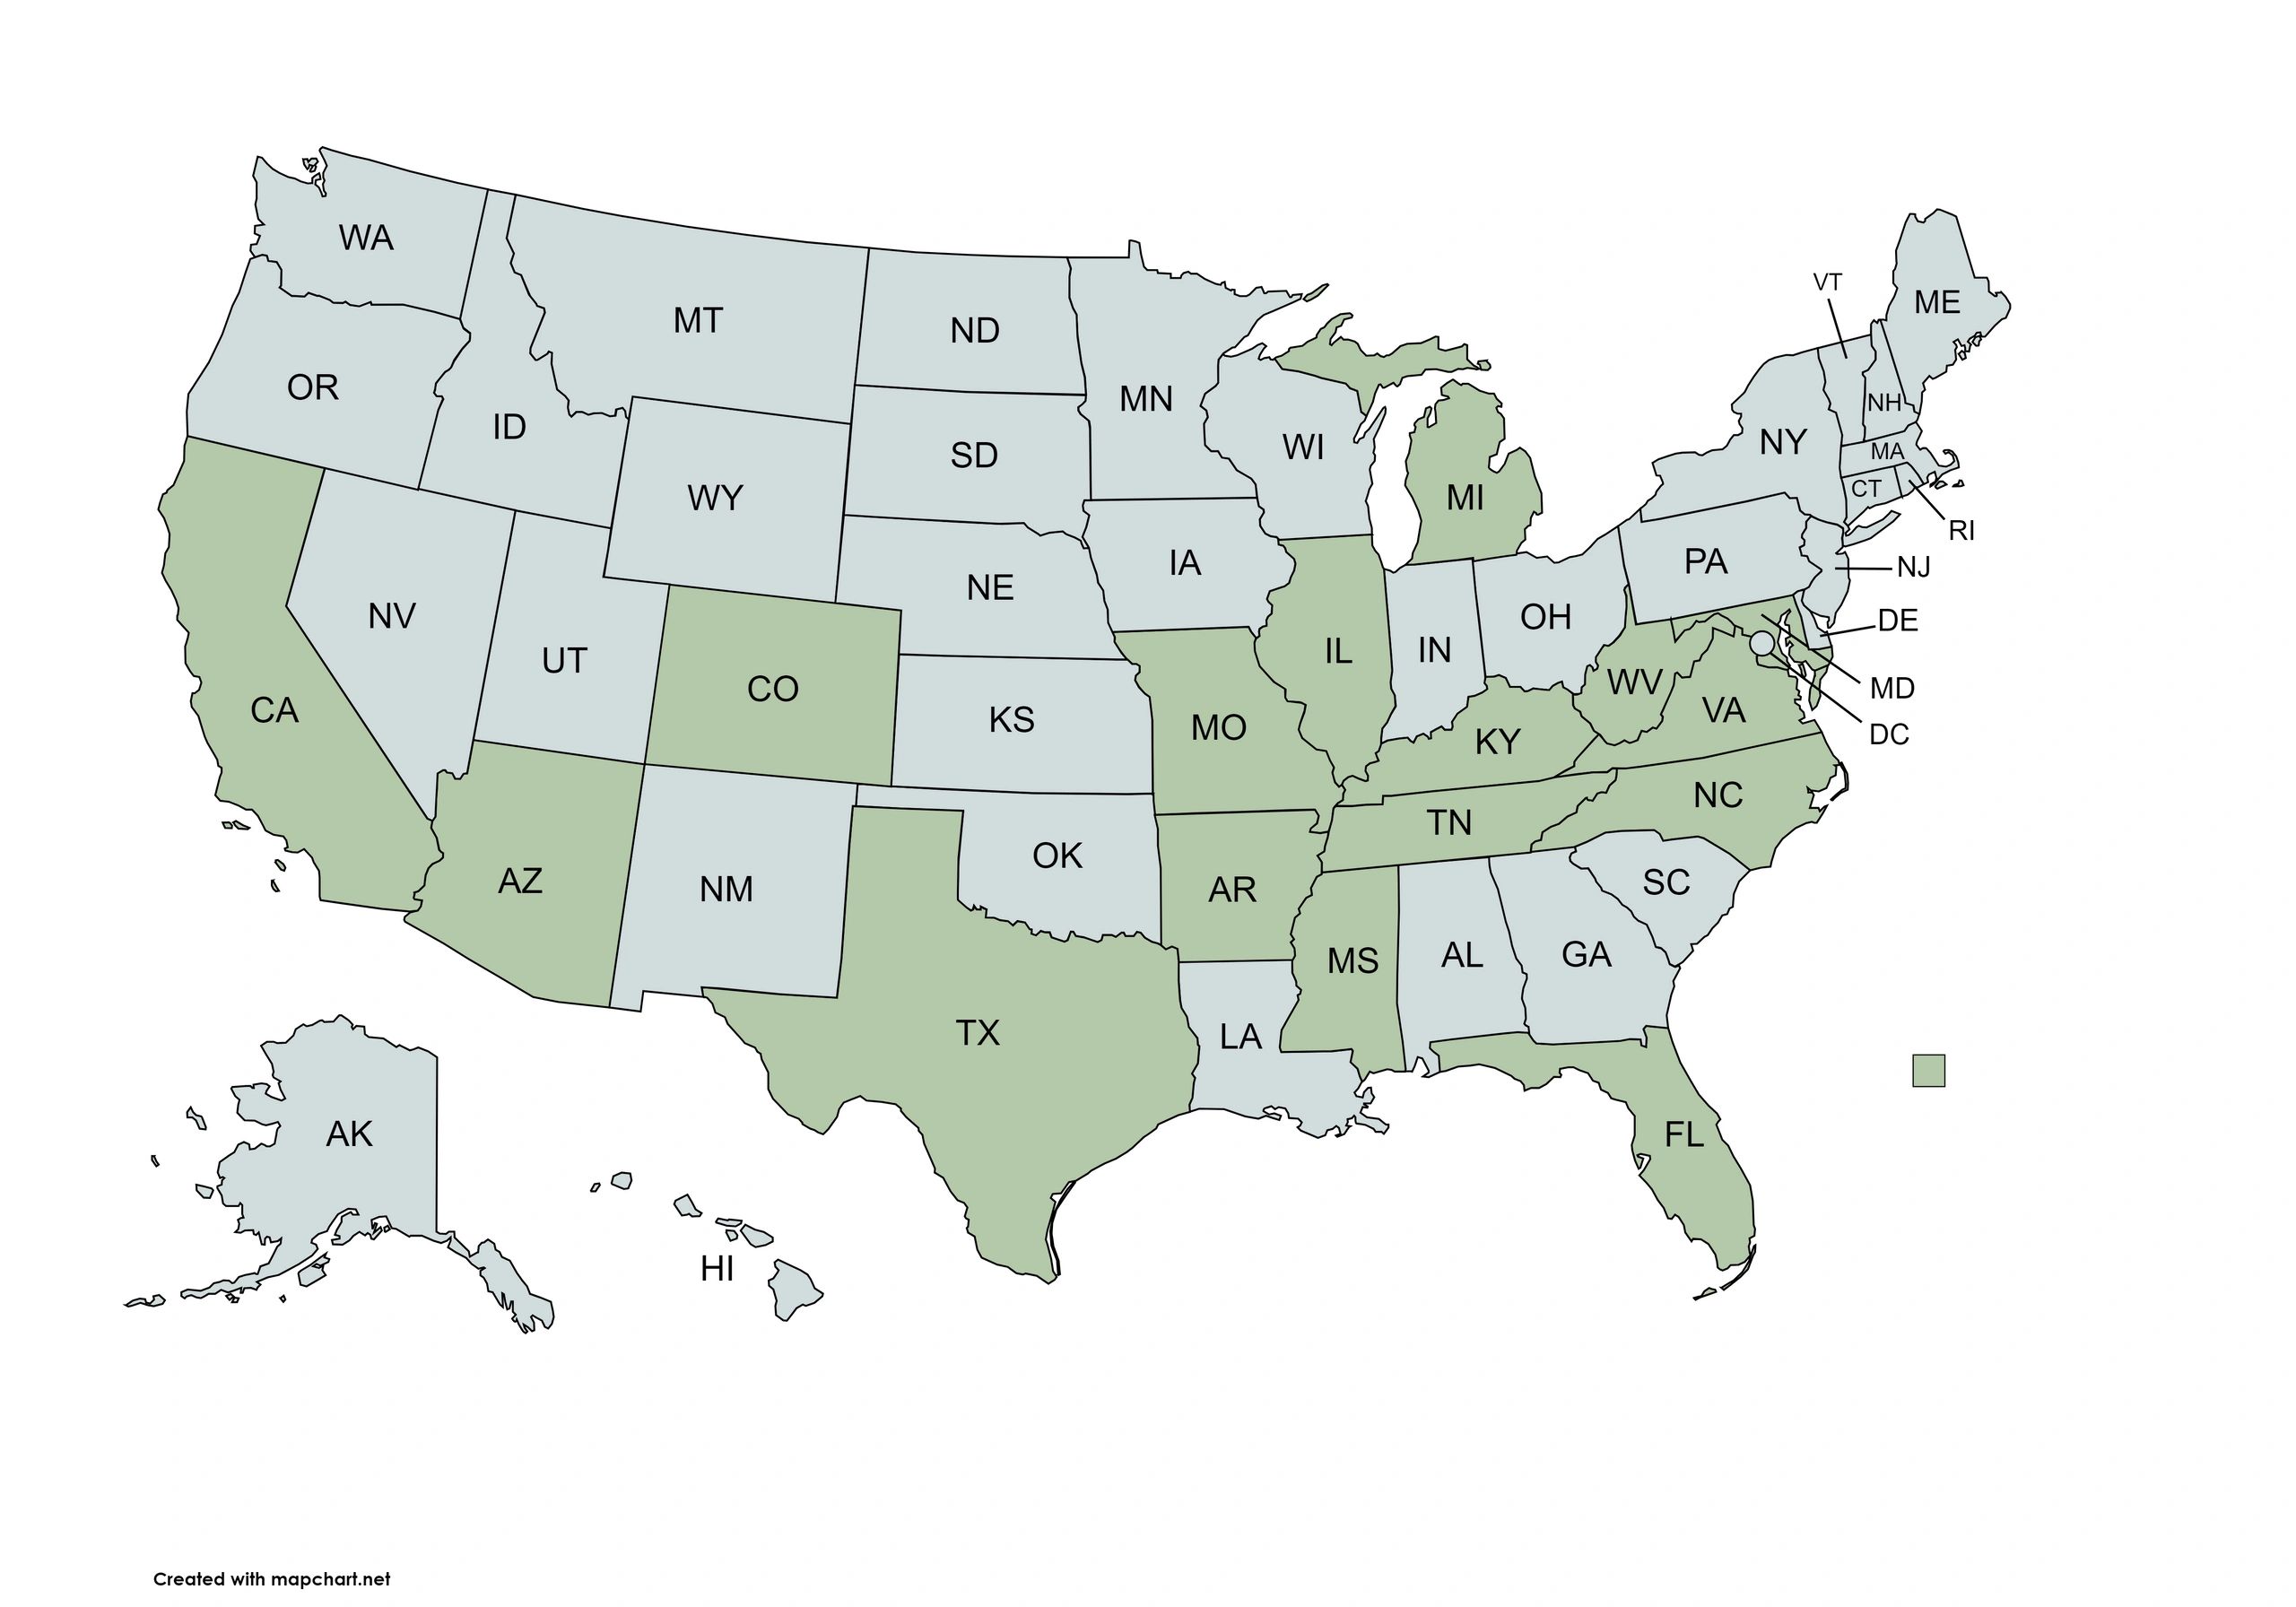 Outline of the USA with outlines of each state. Green states are states we can see clients from.